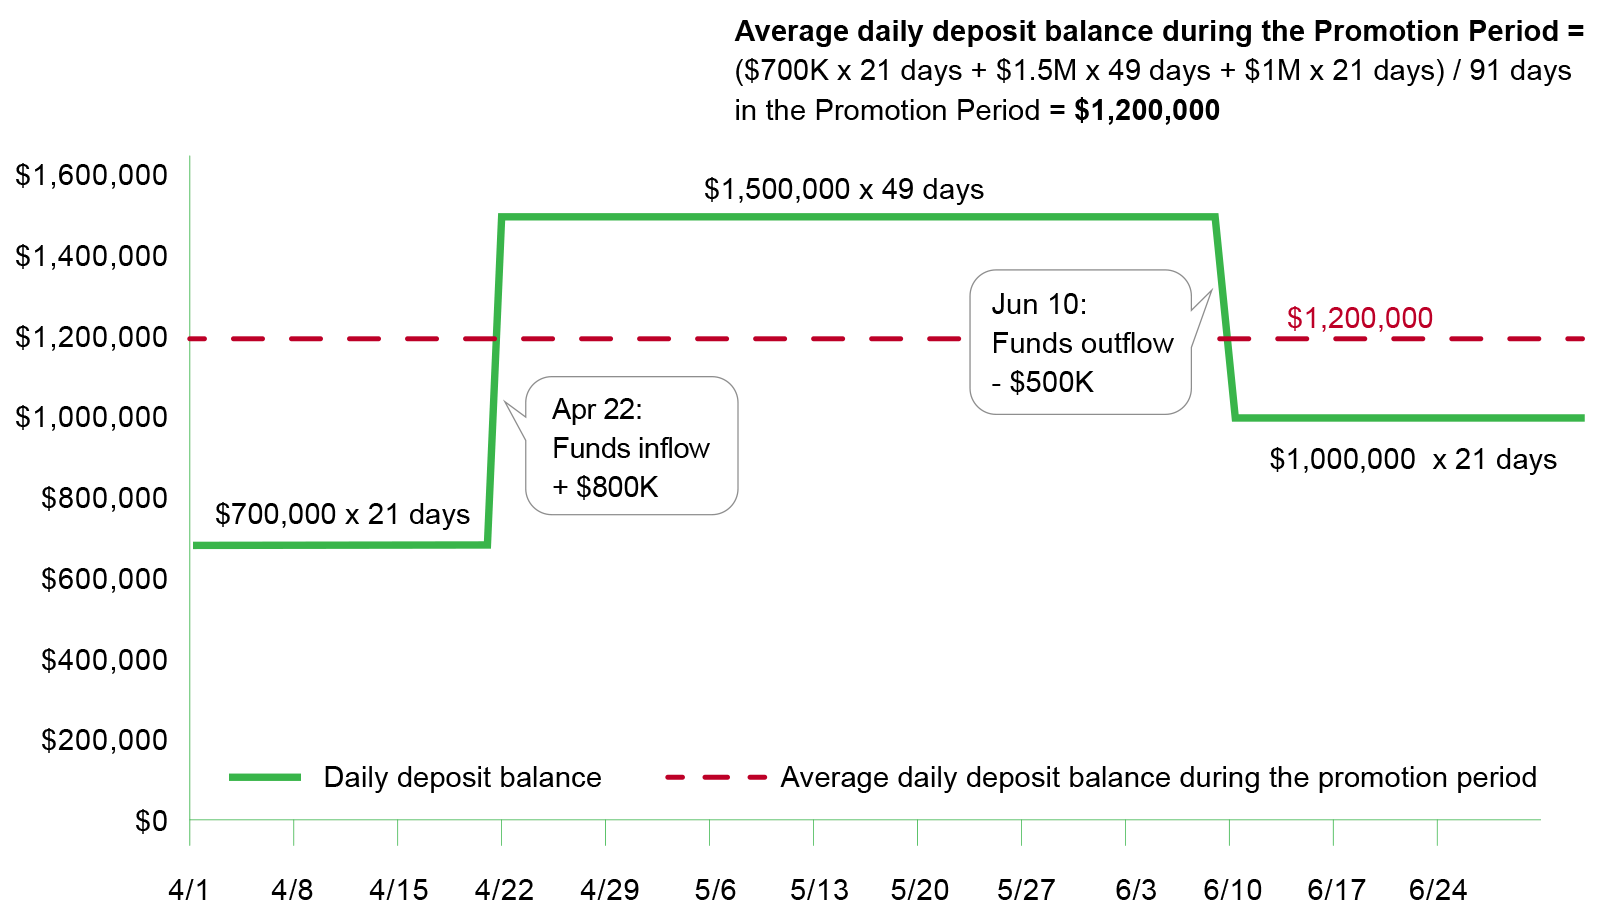 This is an illustrative chart for the above calculation of average daily deposit balance